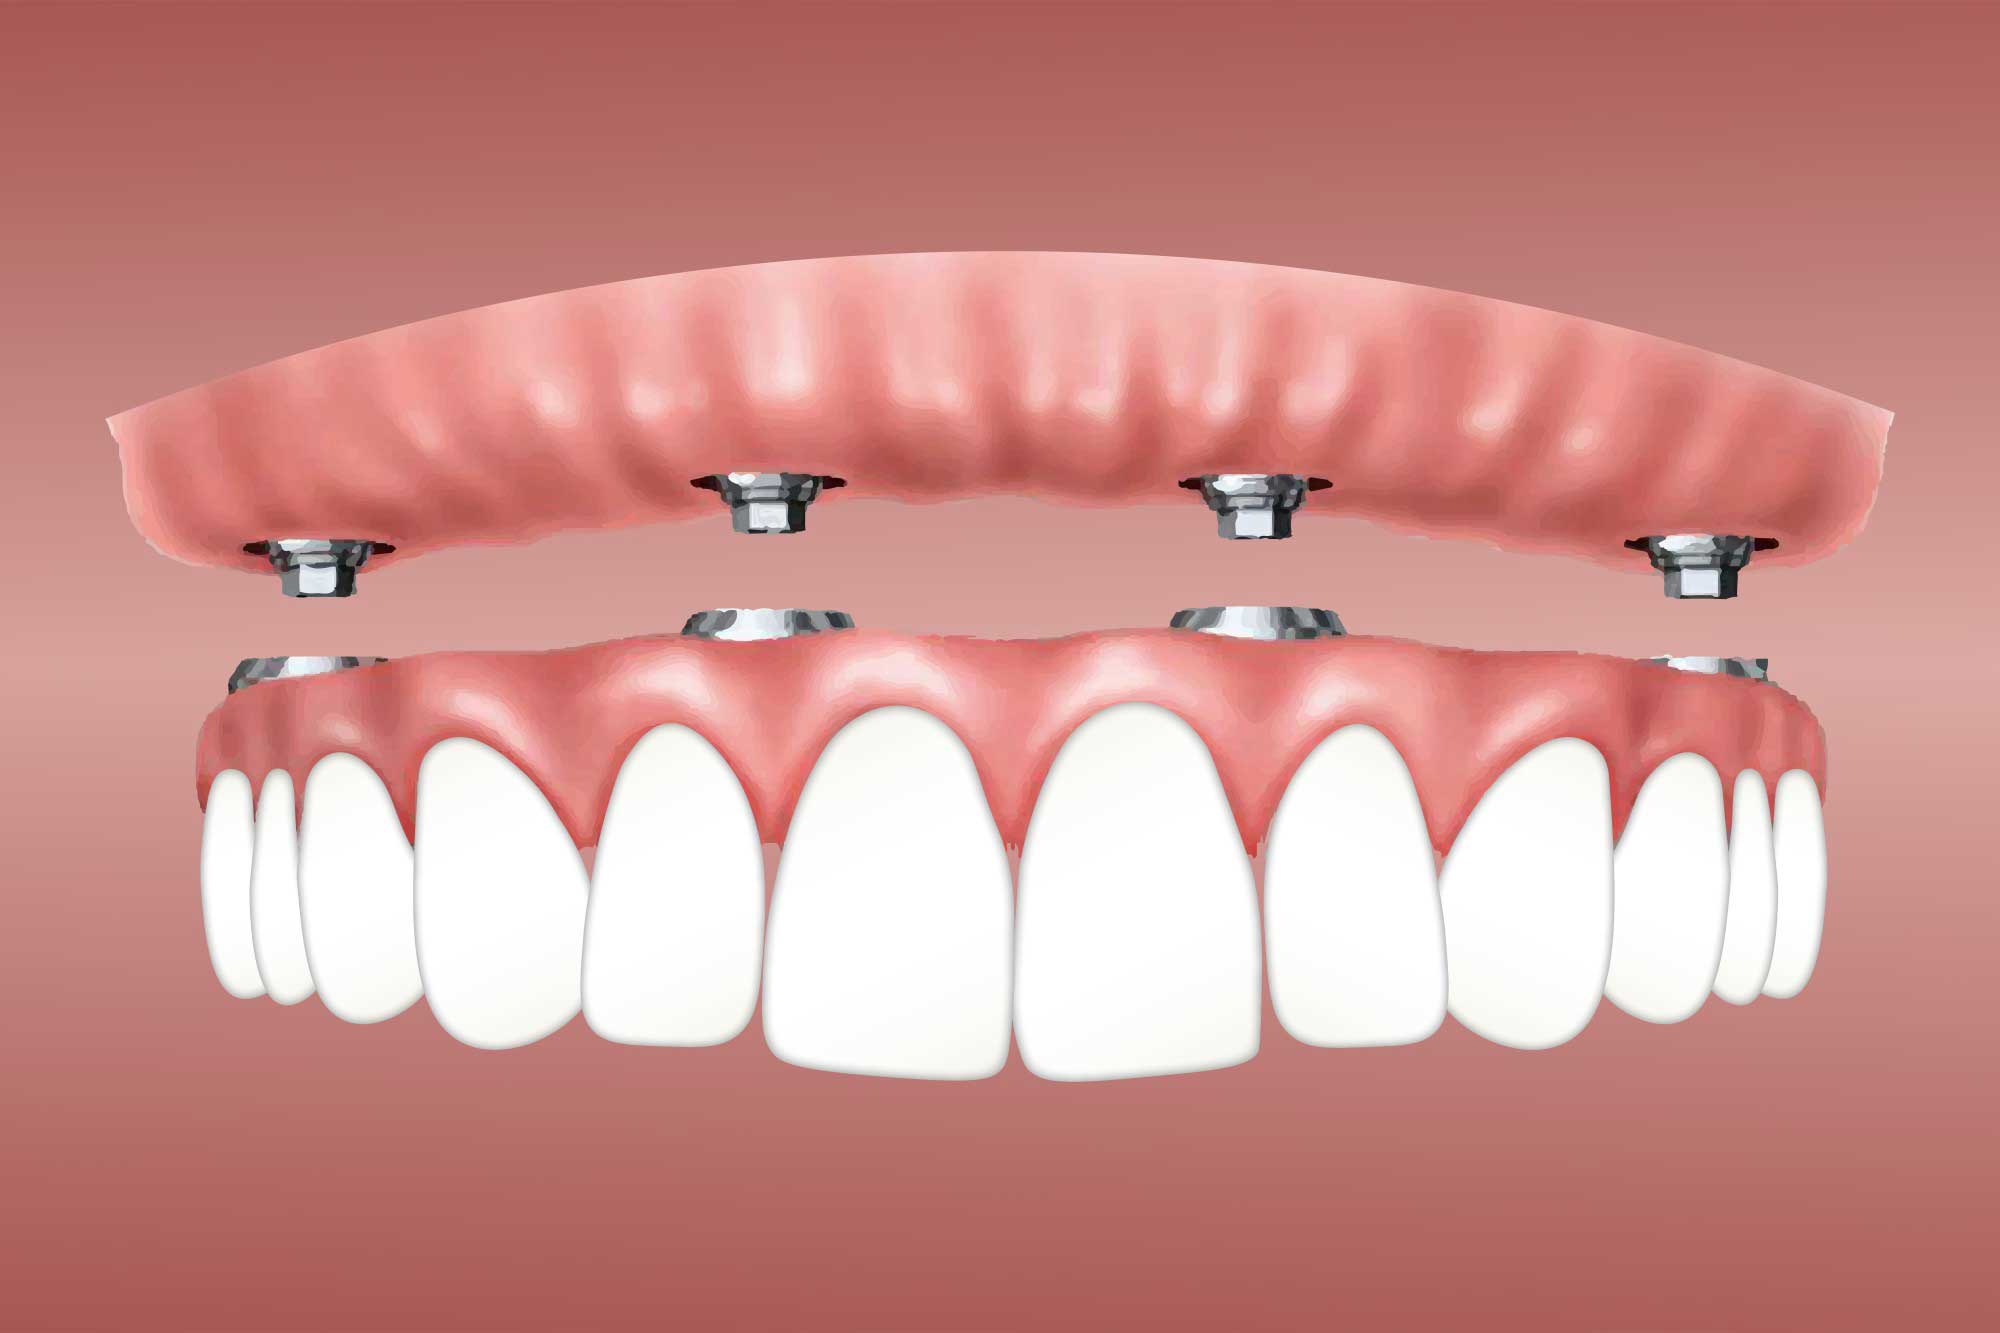 What Are The Latest Advancements In Orthodontic Treatments Offered In Singapore?